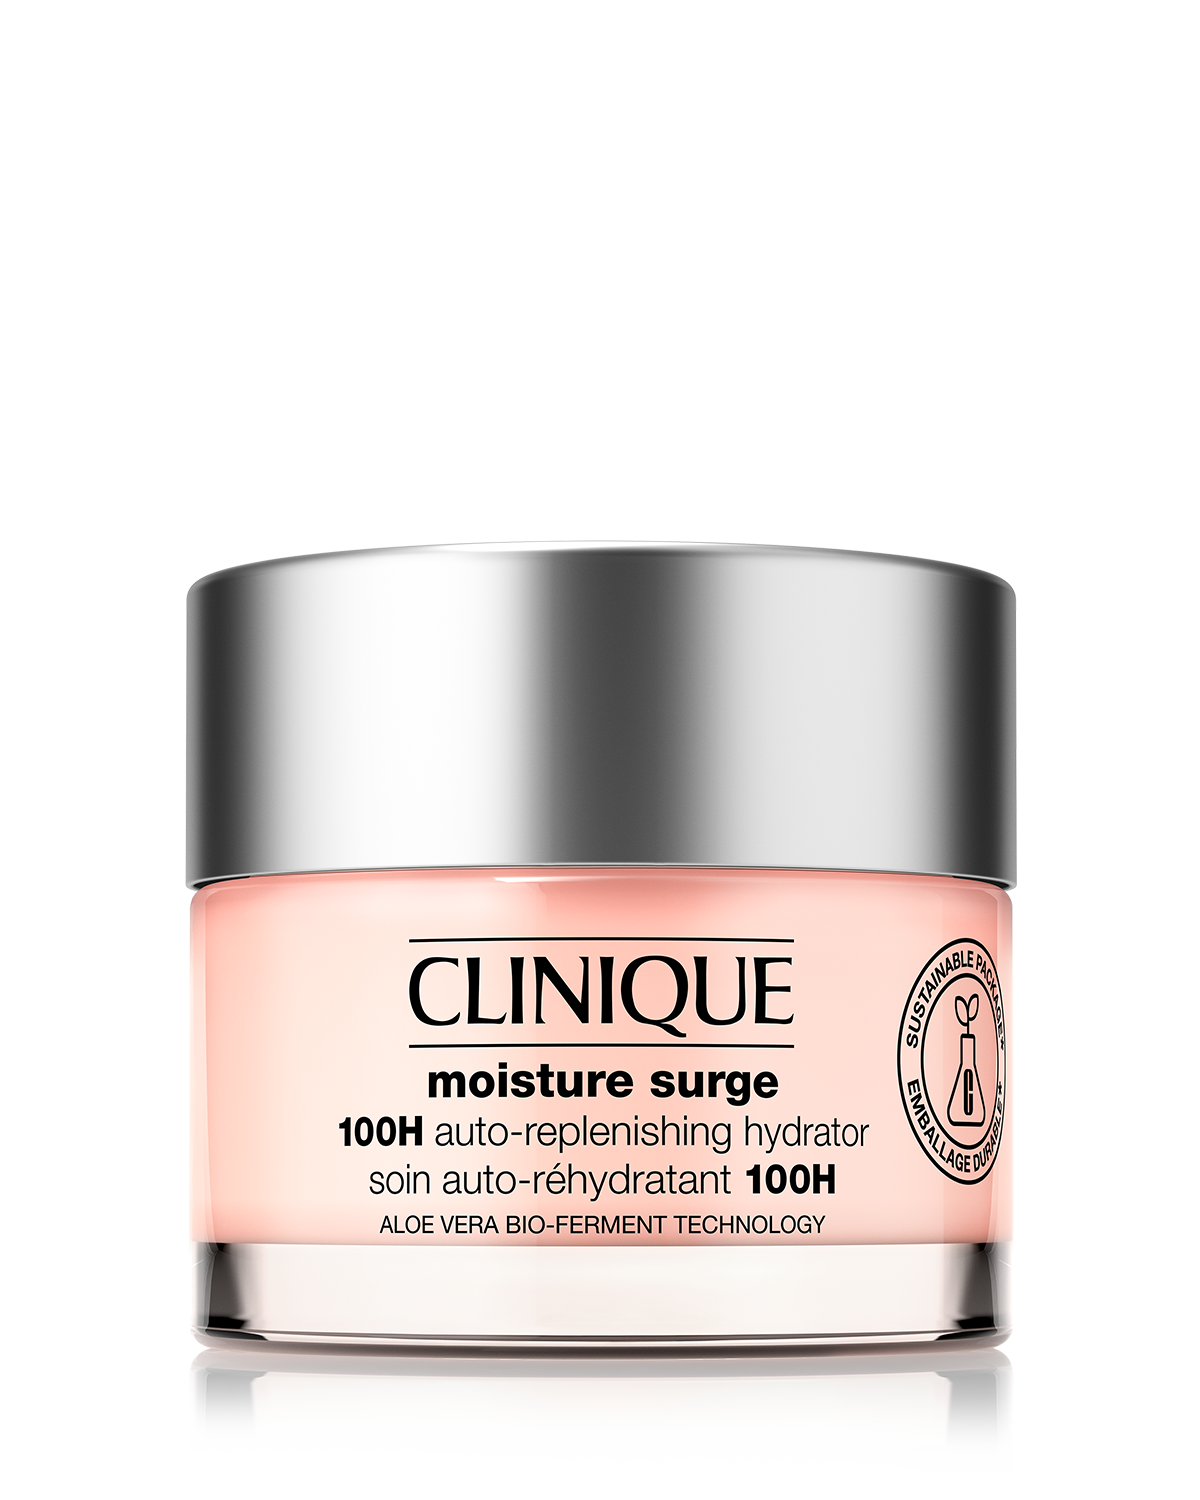 Clinique travel gift set | Travel gift set, Clinique, Travel gifts